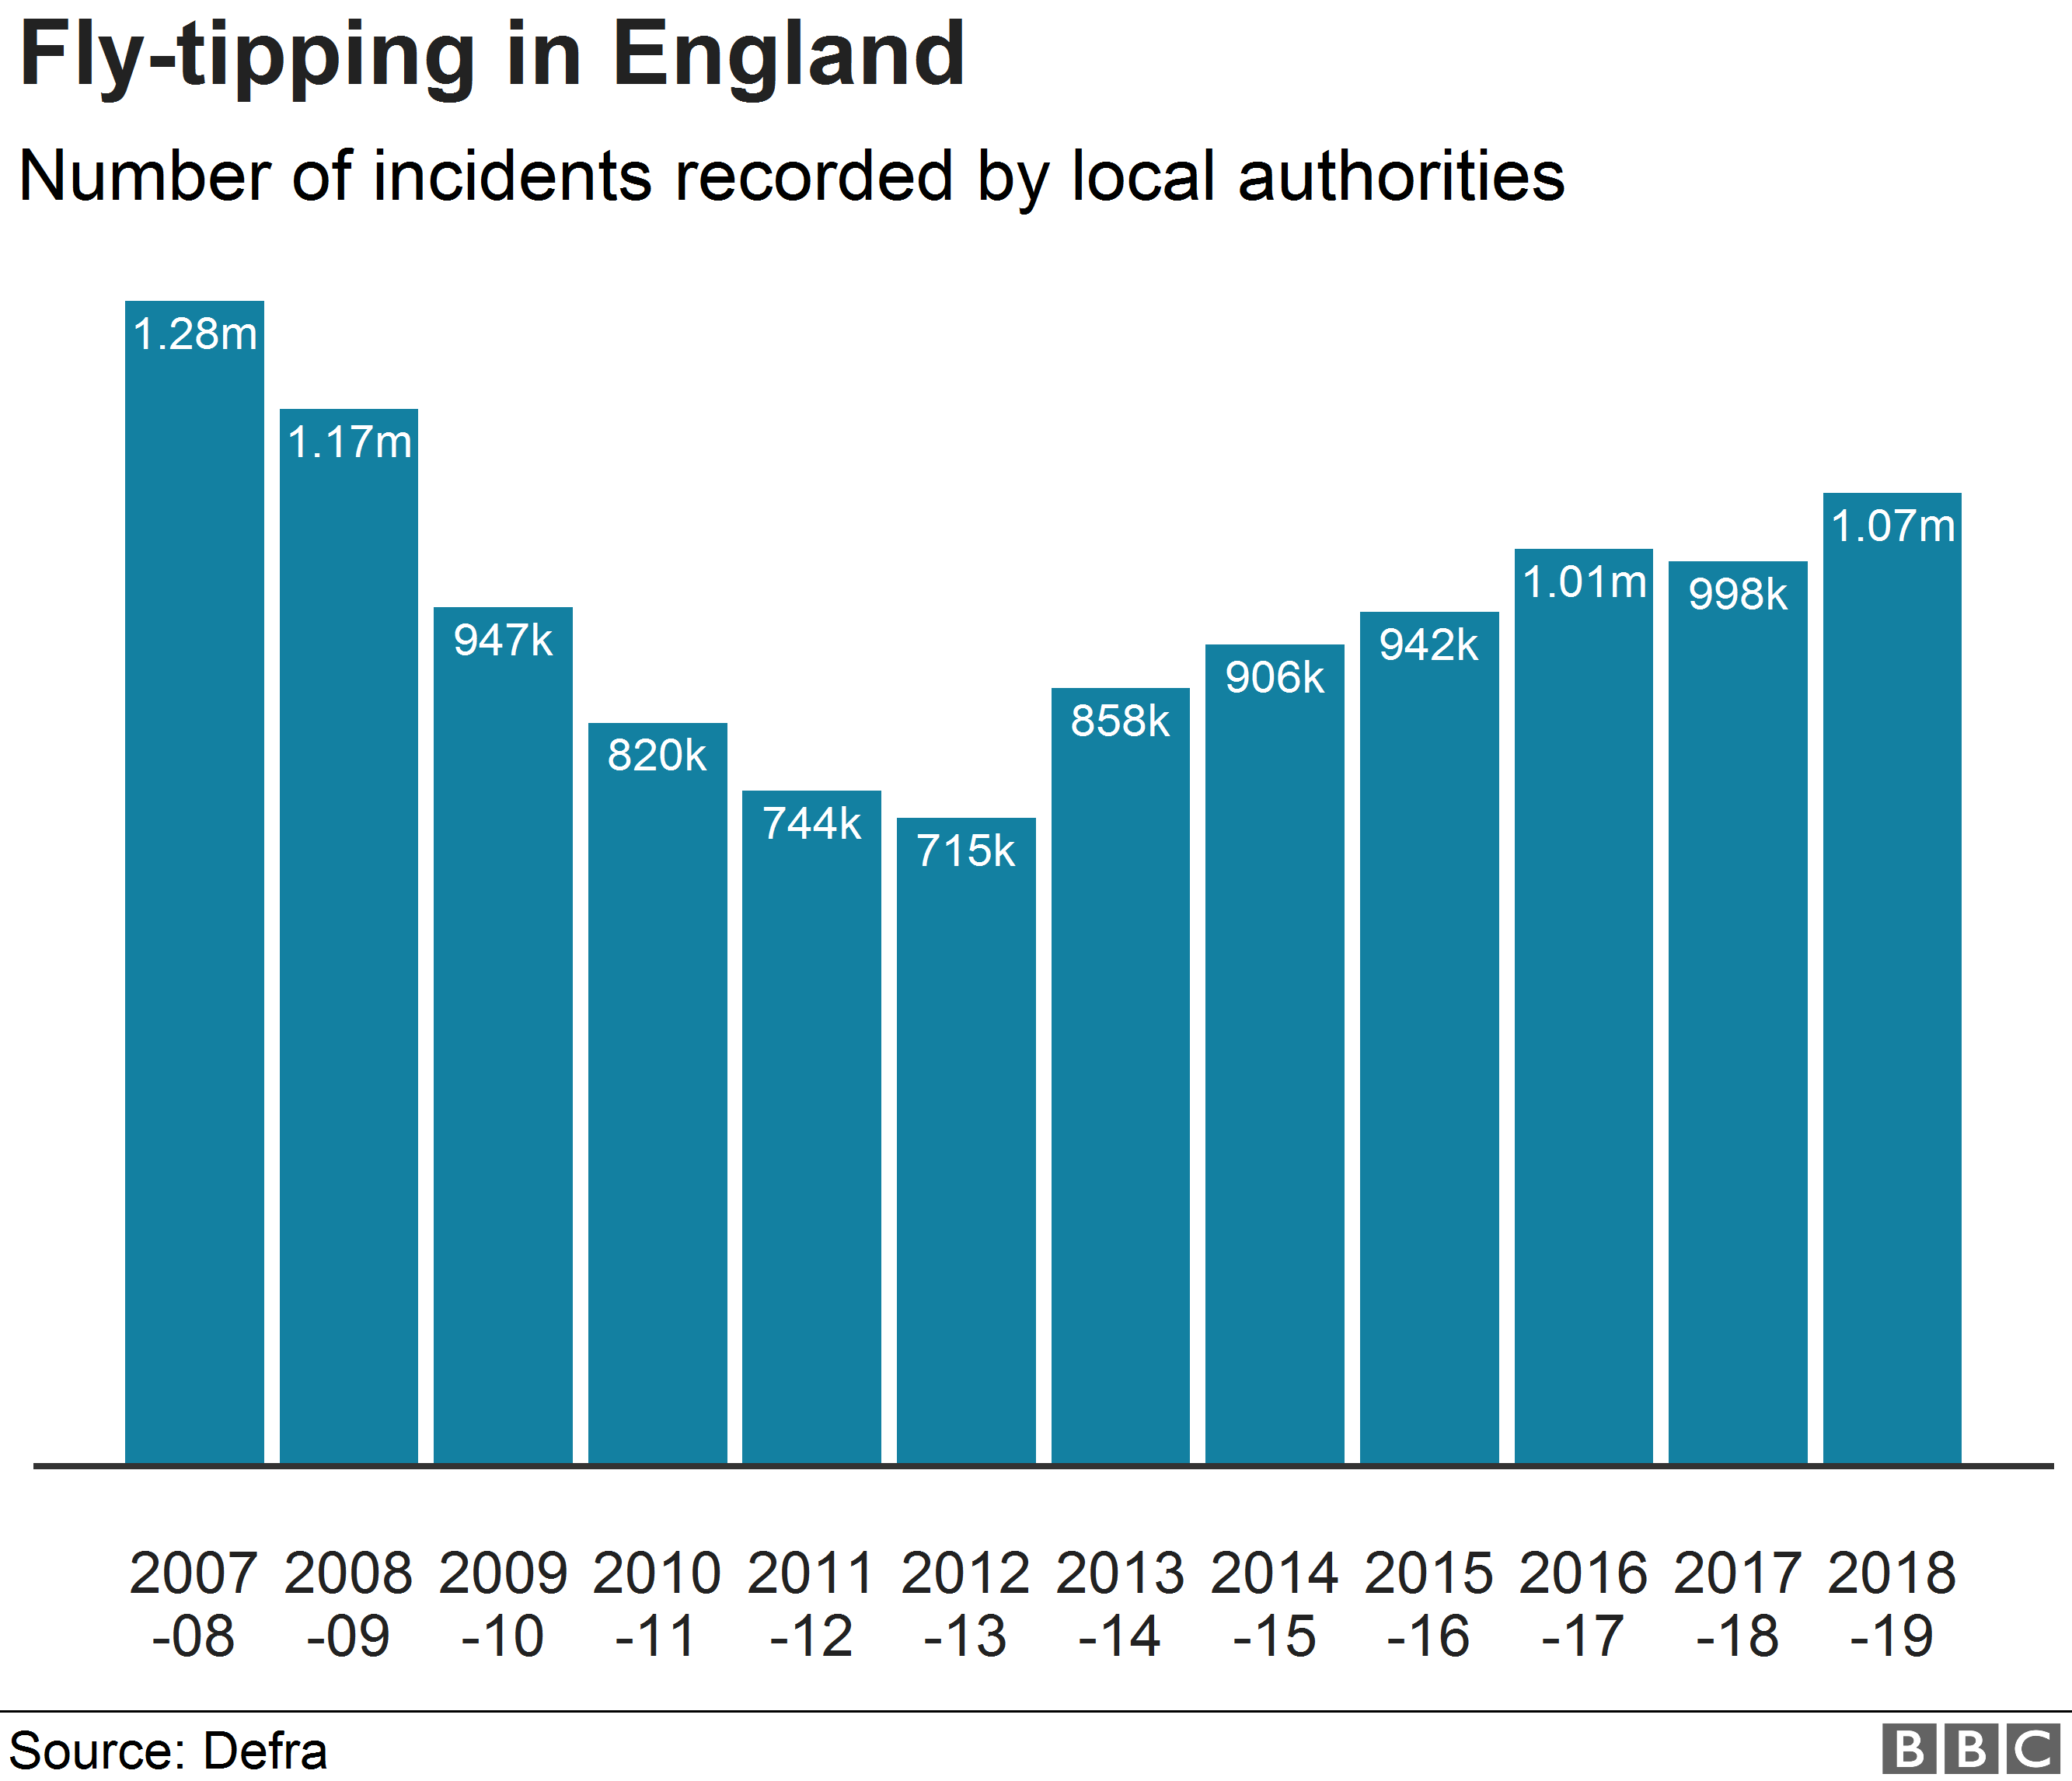 fly-tipping incidents in England